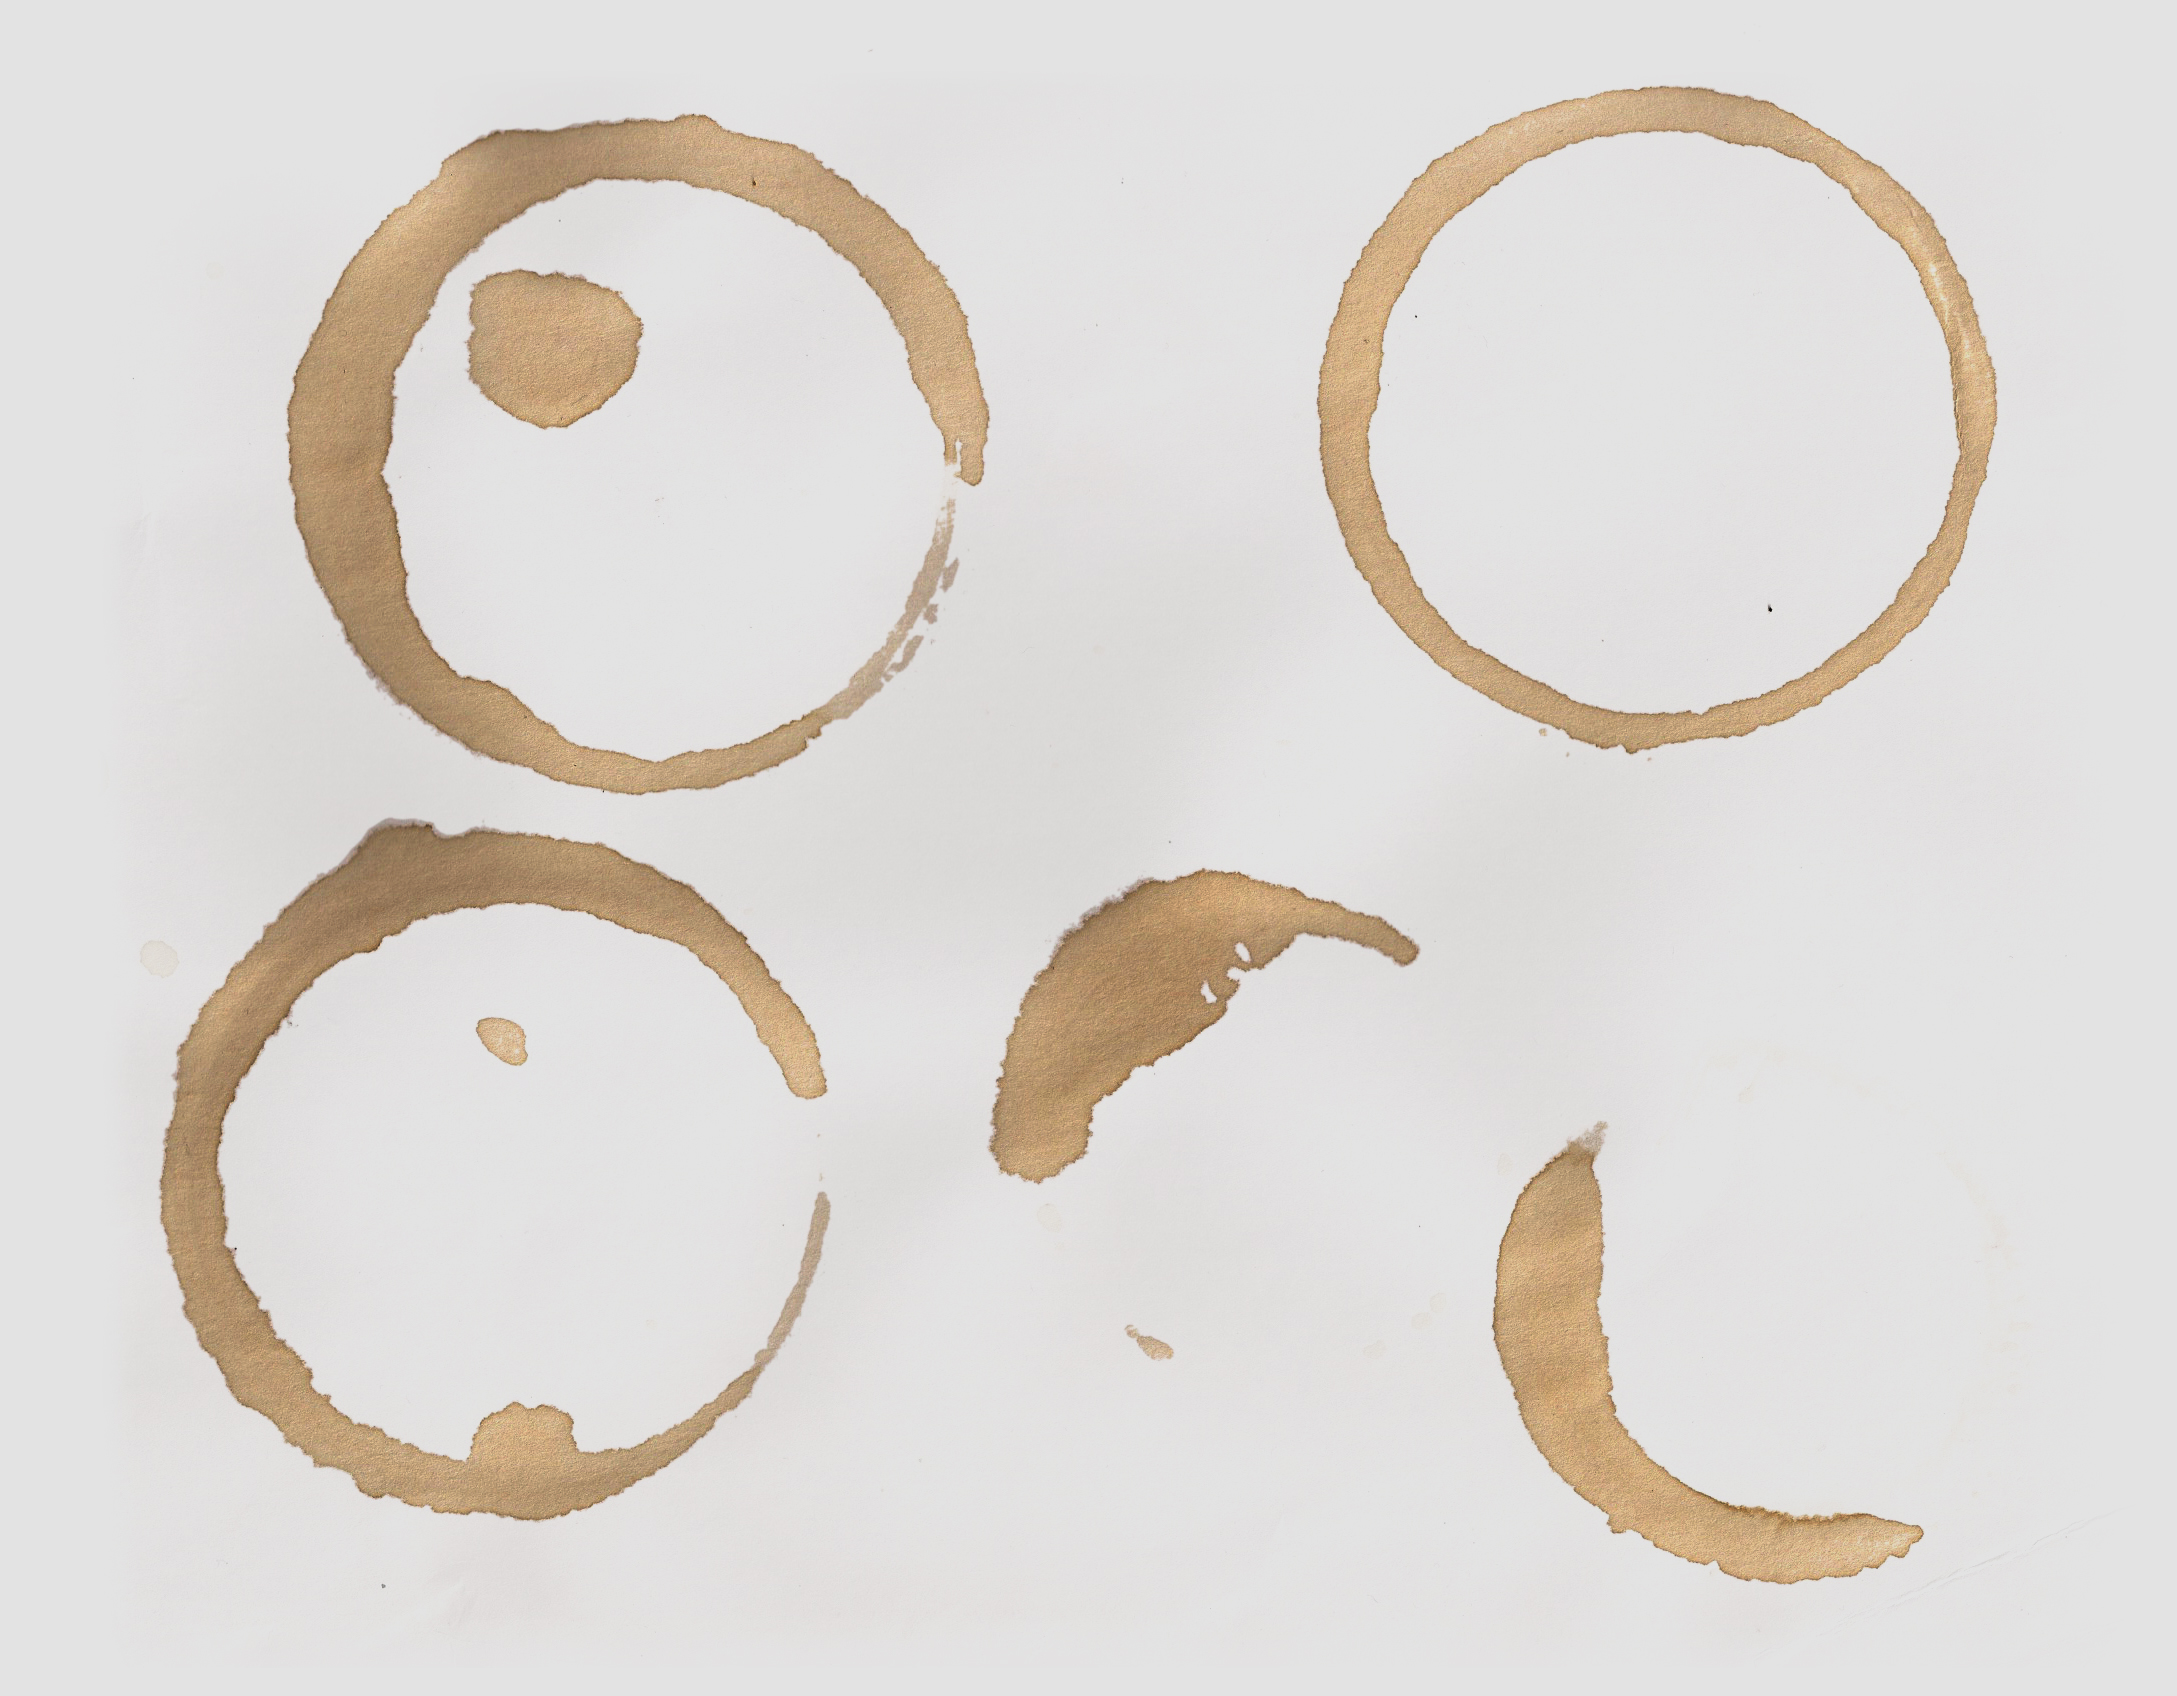 14 Coffee Cup Ring Stain Textures | ArtisticPOV